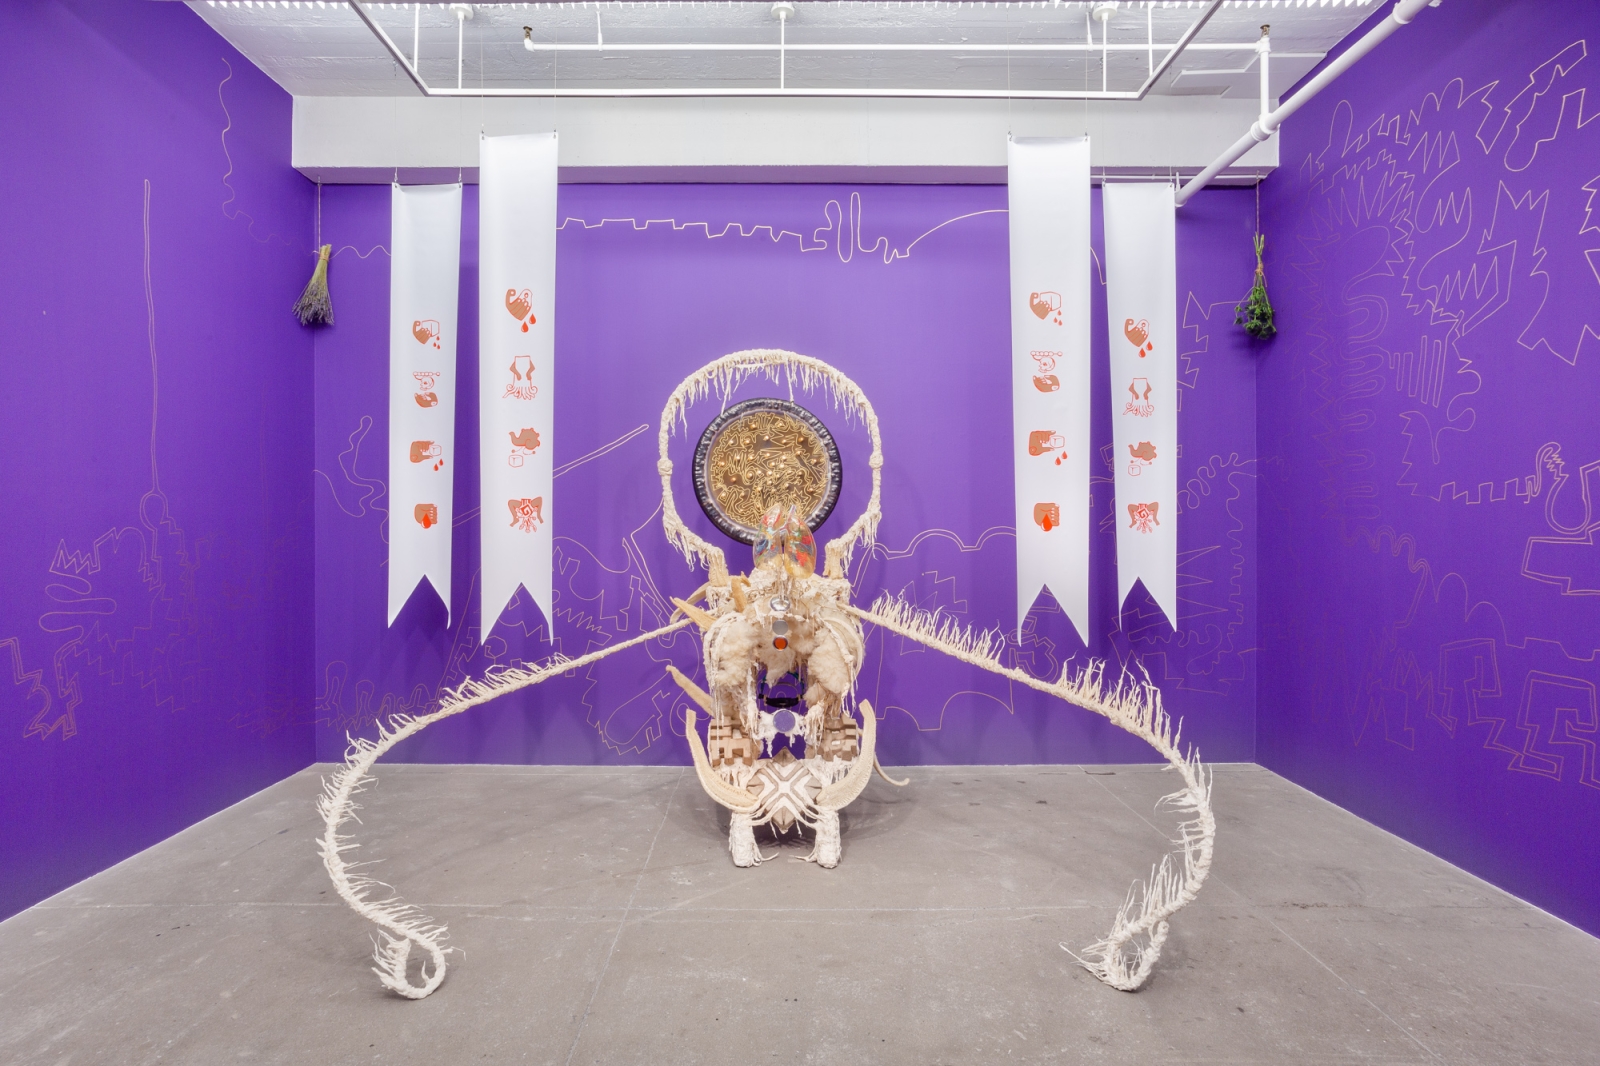 Guadalupe Maravilla
Disease Thrower #4, 2019 (installation view)
gong, steel, wood, cotton, glue mixture, plastic, loofah, and objects collected from a ritual of retracing the artist&#39;s original migration route
96 x 57 x 63 ins.
243.8 x 144.8 x 160 cm